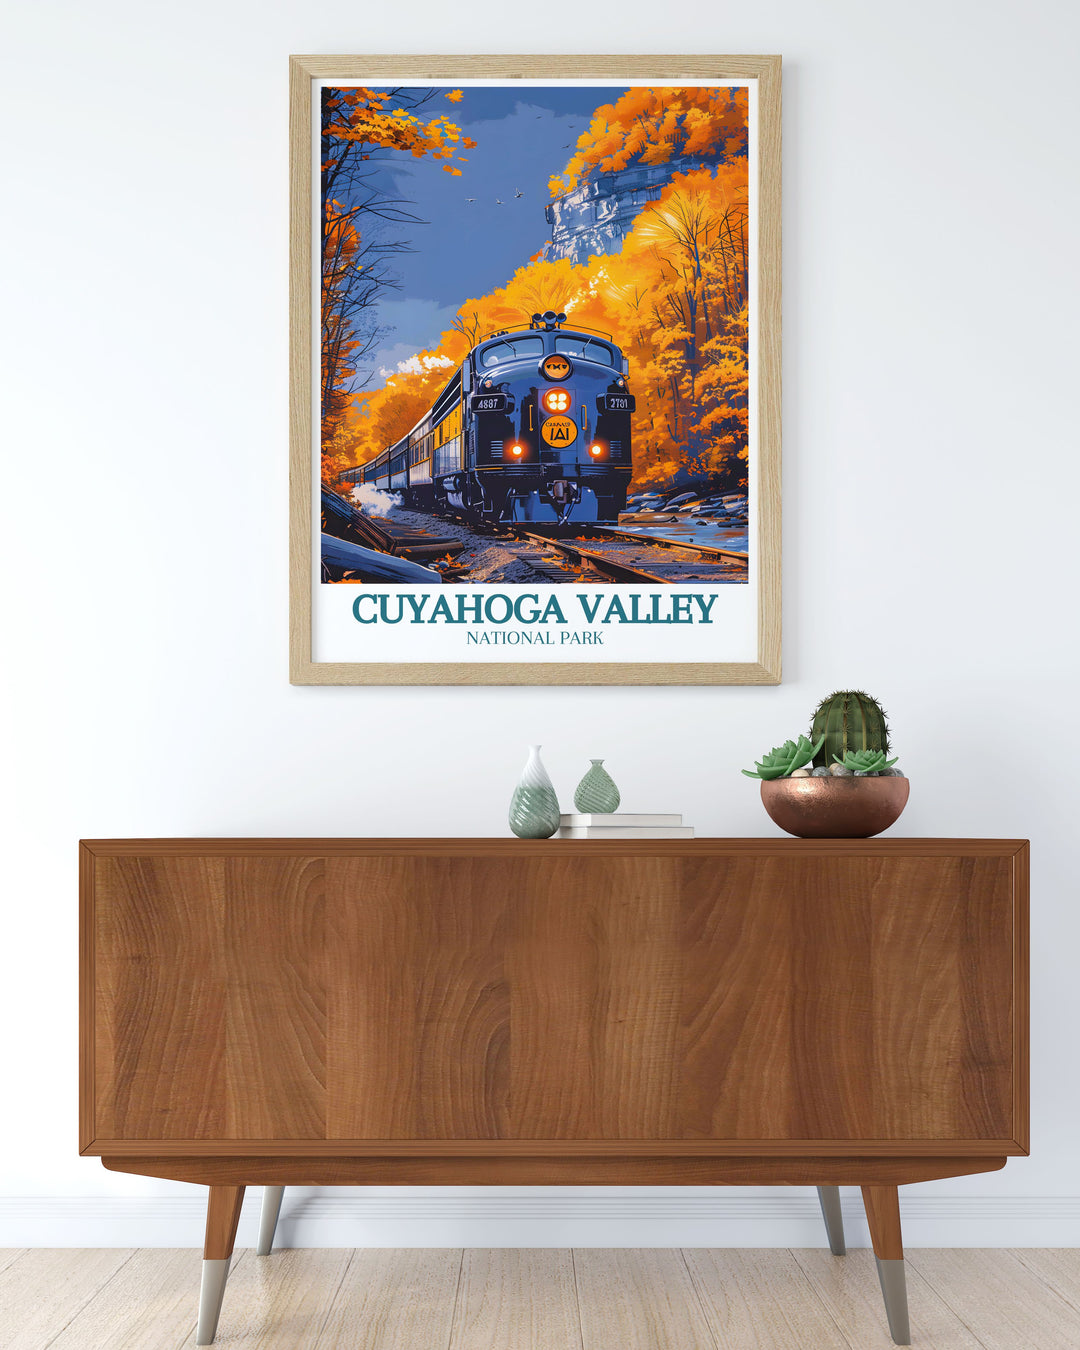 Beautiful vintage poster of Cuyahoga Valley National Park, featuring the serene Cuyahoga River and surrounding landscapes. Ideal for those who love national parks and retro wall decor.